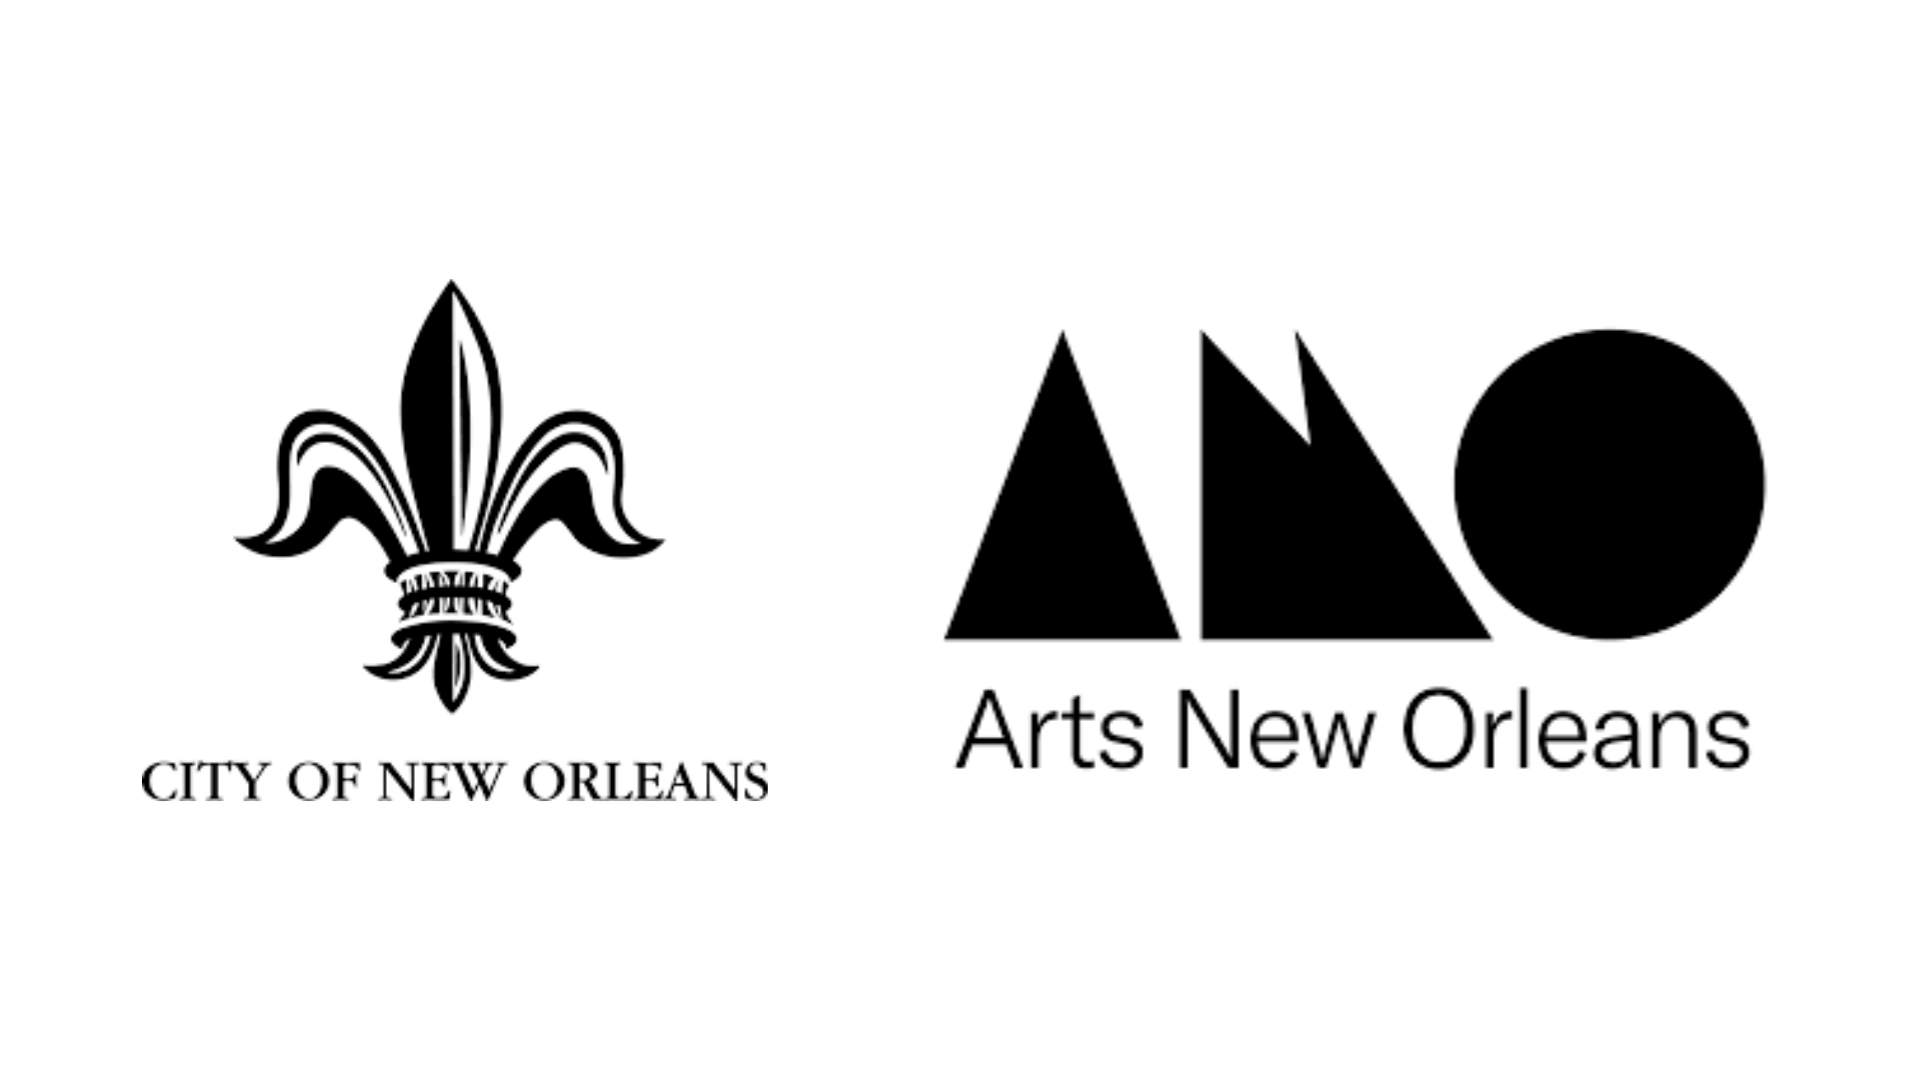 This program is supported in part by a Community Arts Grant made possible by the City of New Orleans as administered by Arts New Orleans.